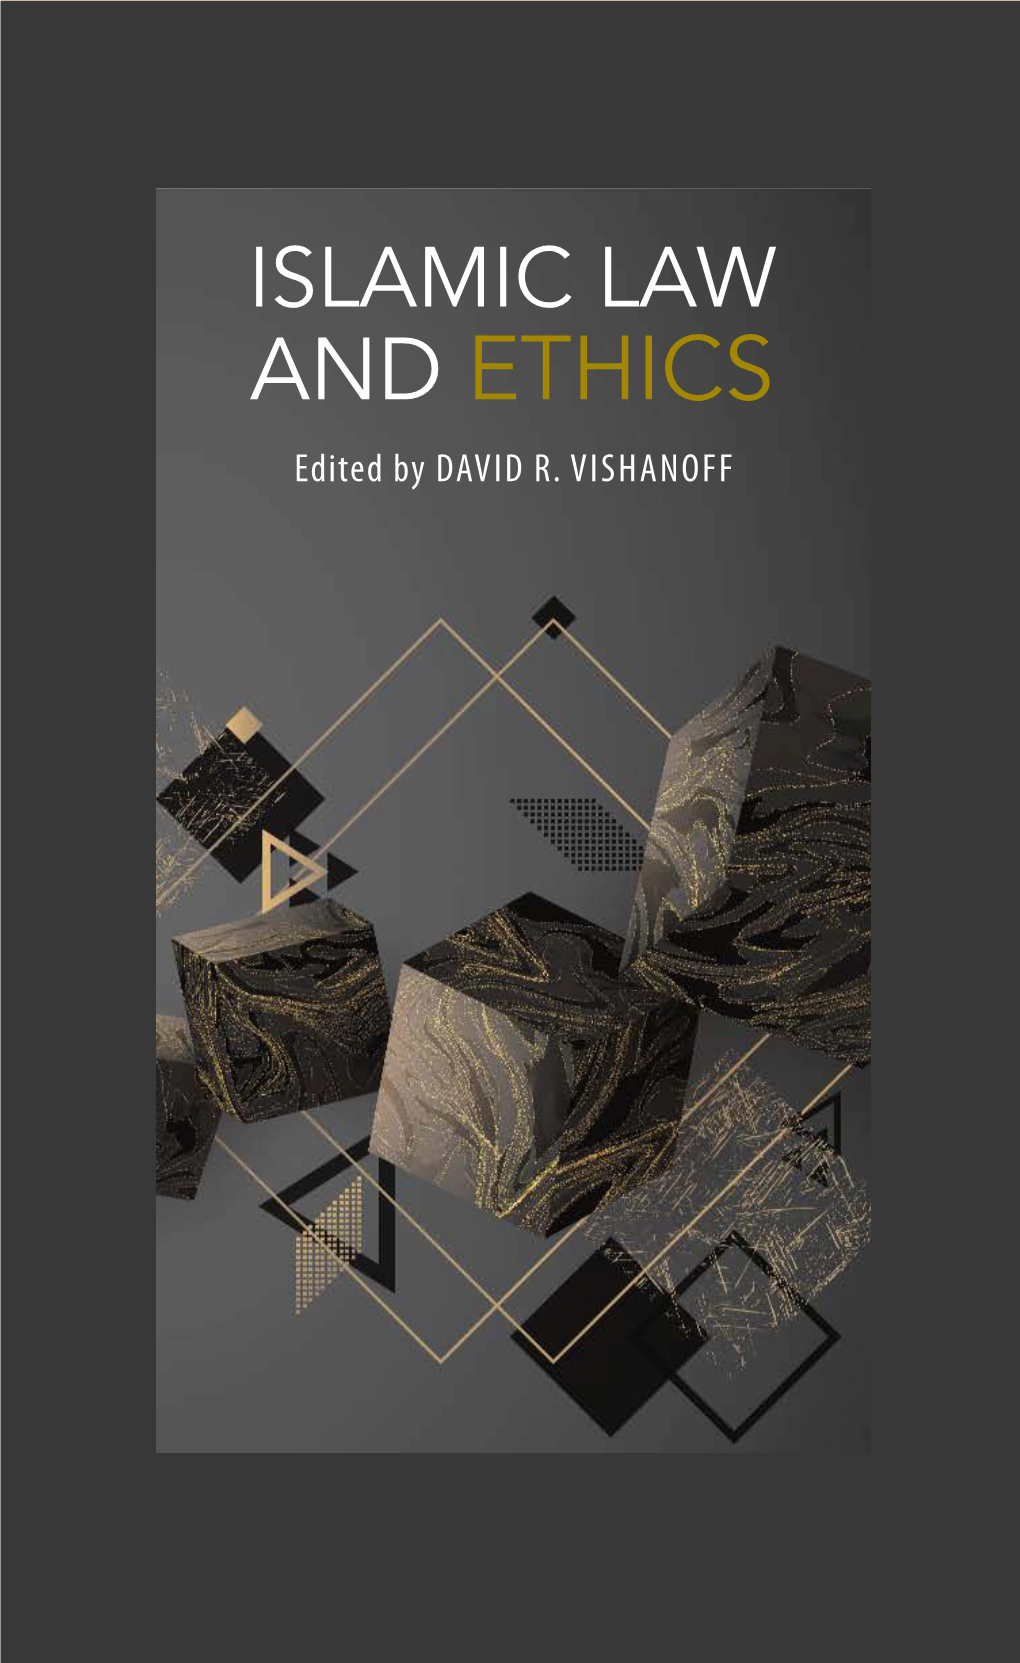 ISLAMIC LAW and ETHICS Text 09/06/2020 18:45 Page I